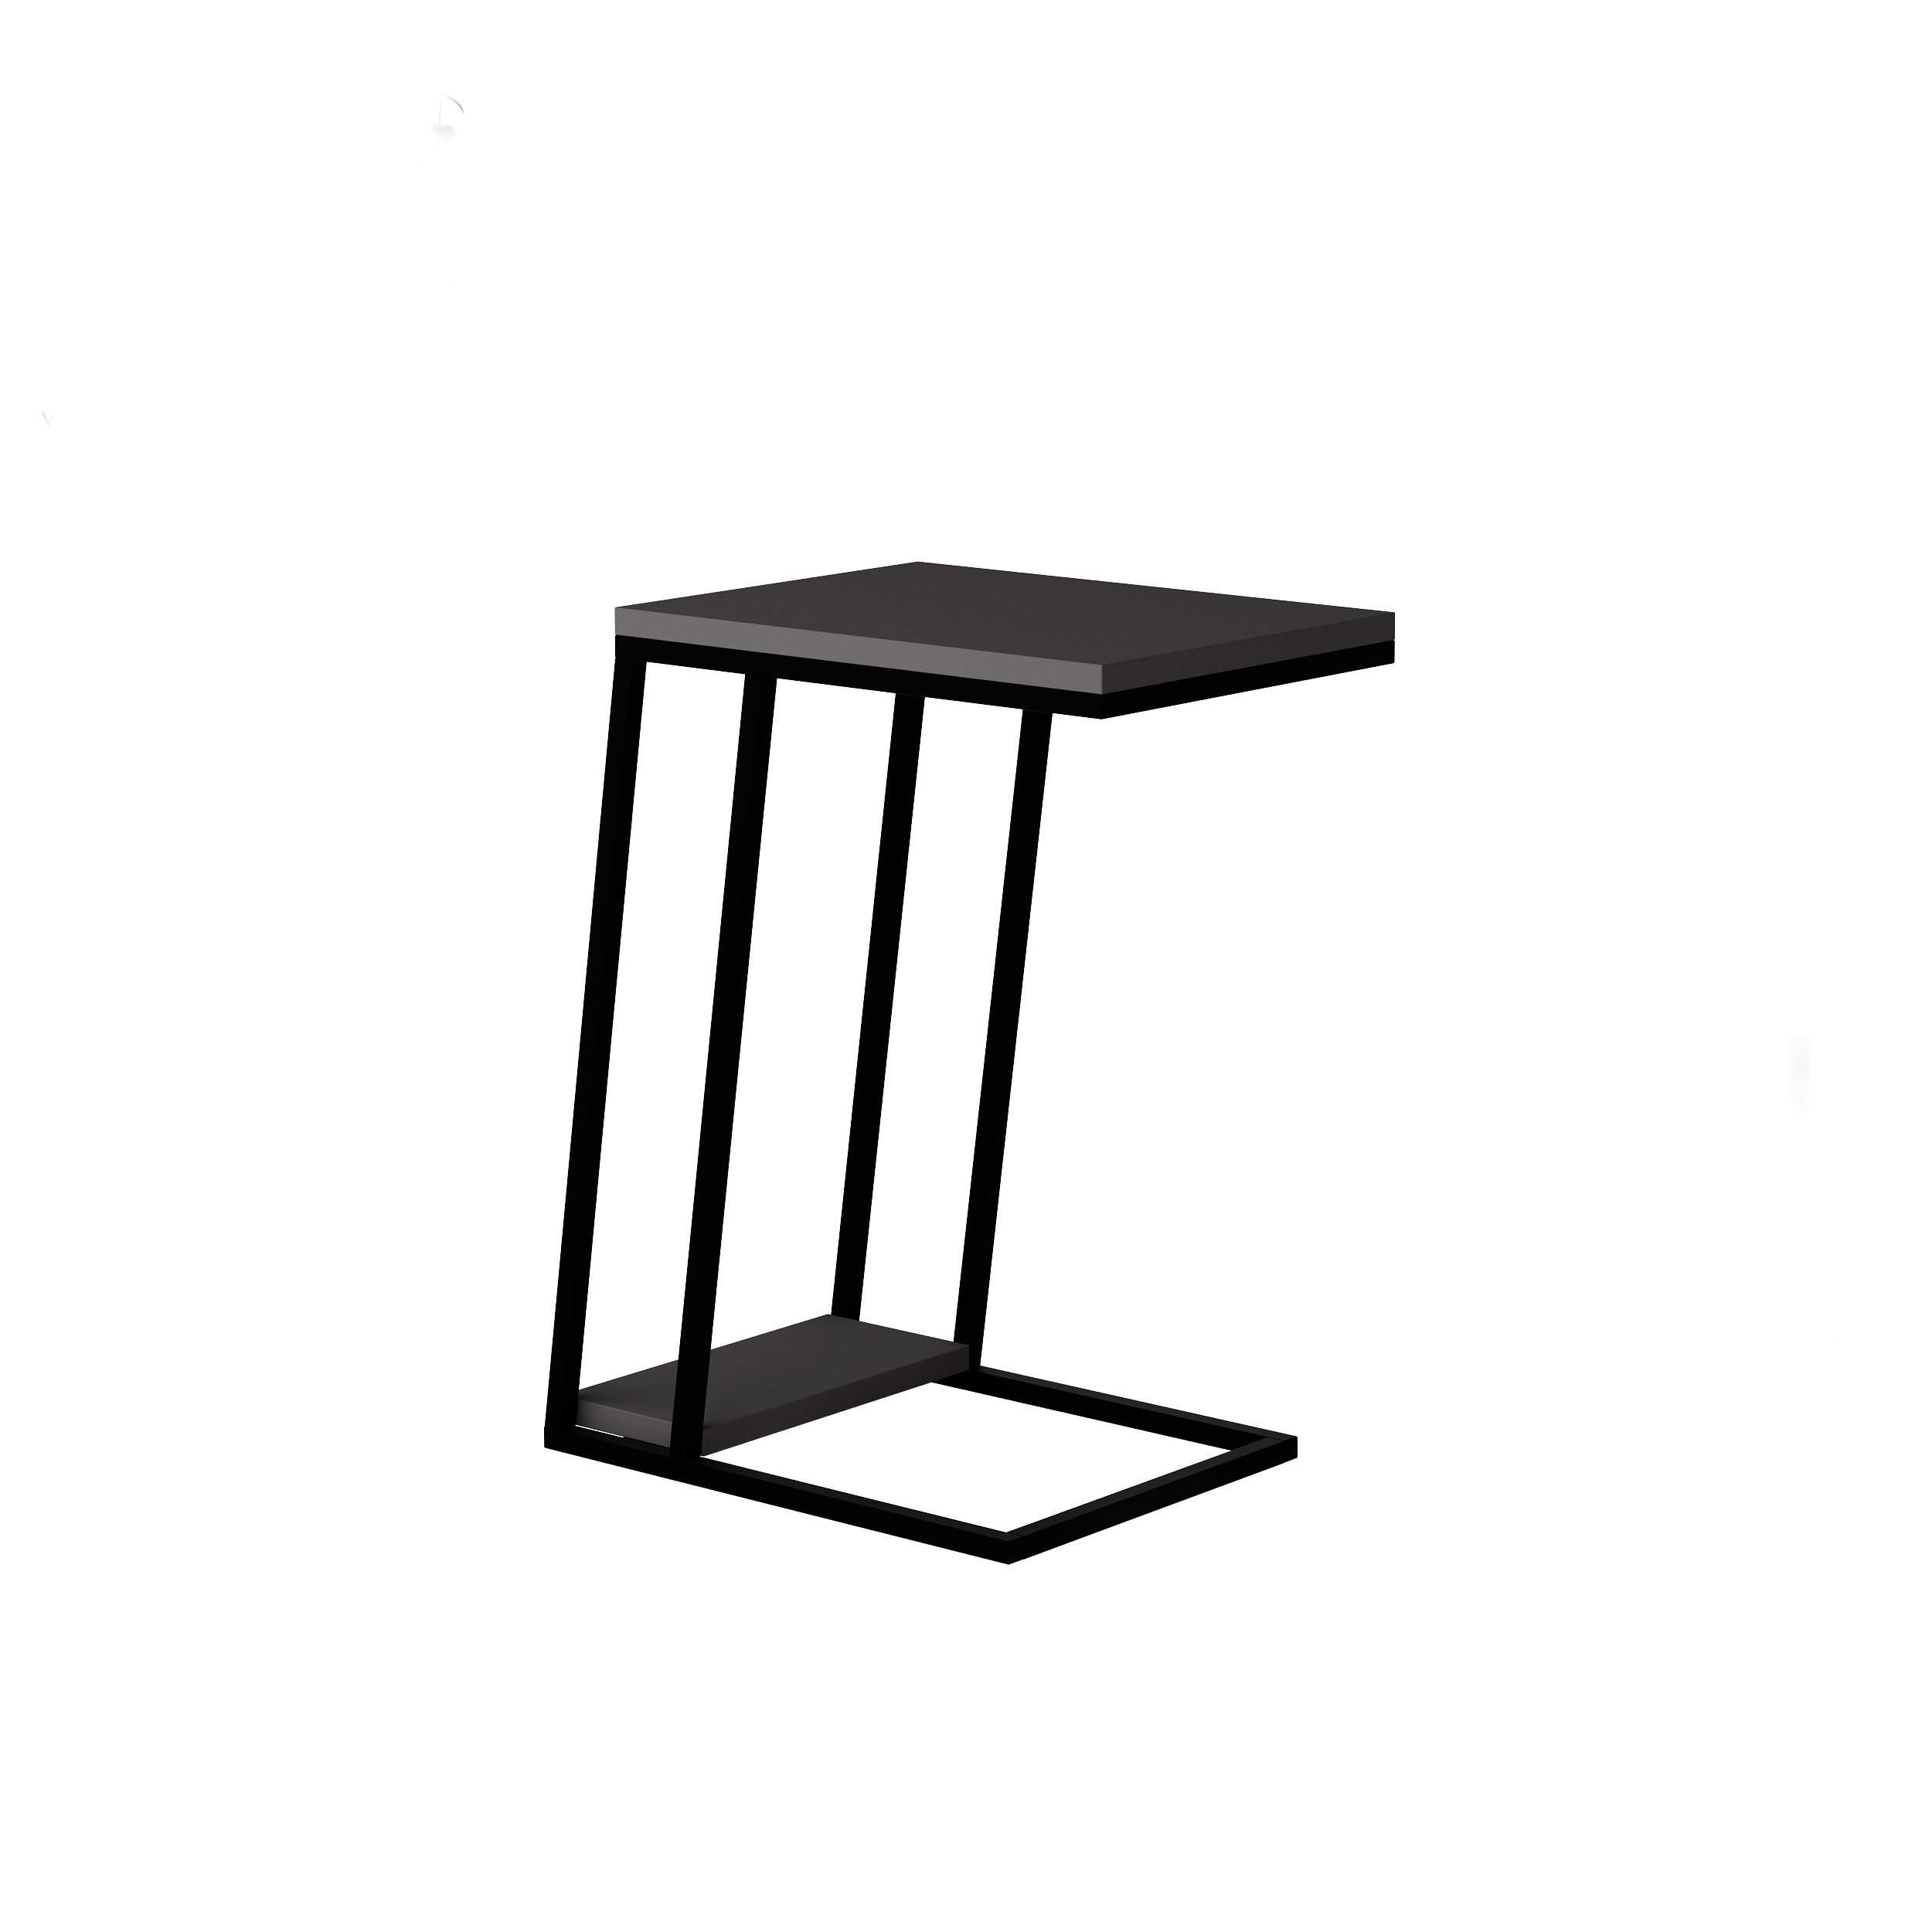 PAL C SIDE TABLE - ANTHRACITE - M.SH.16944.3